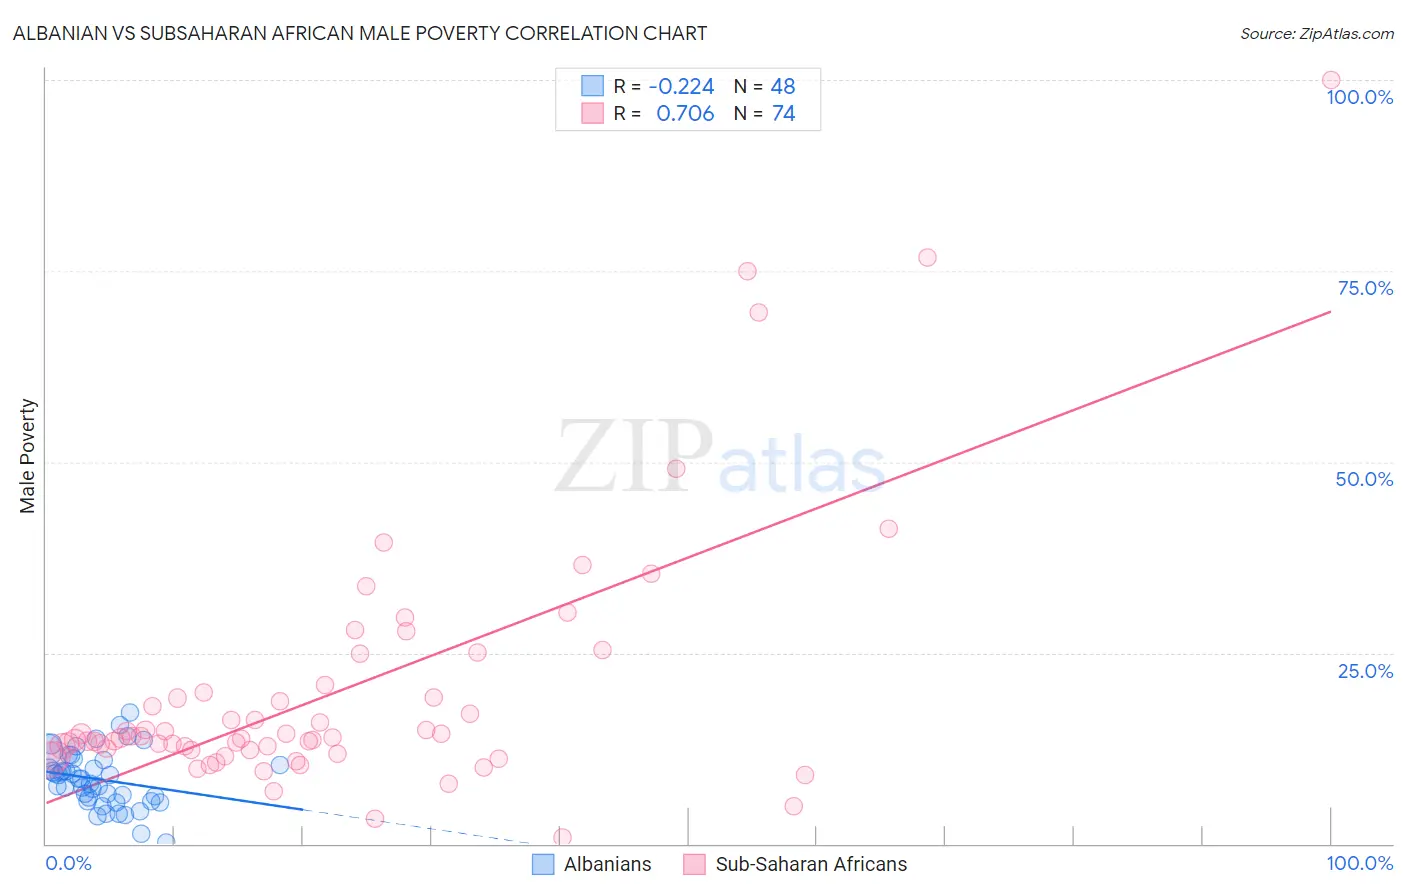 Albanian vs Subsaharan African Male Poverty